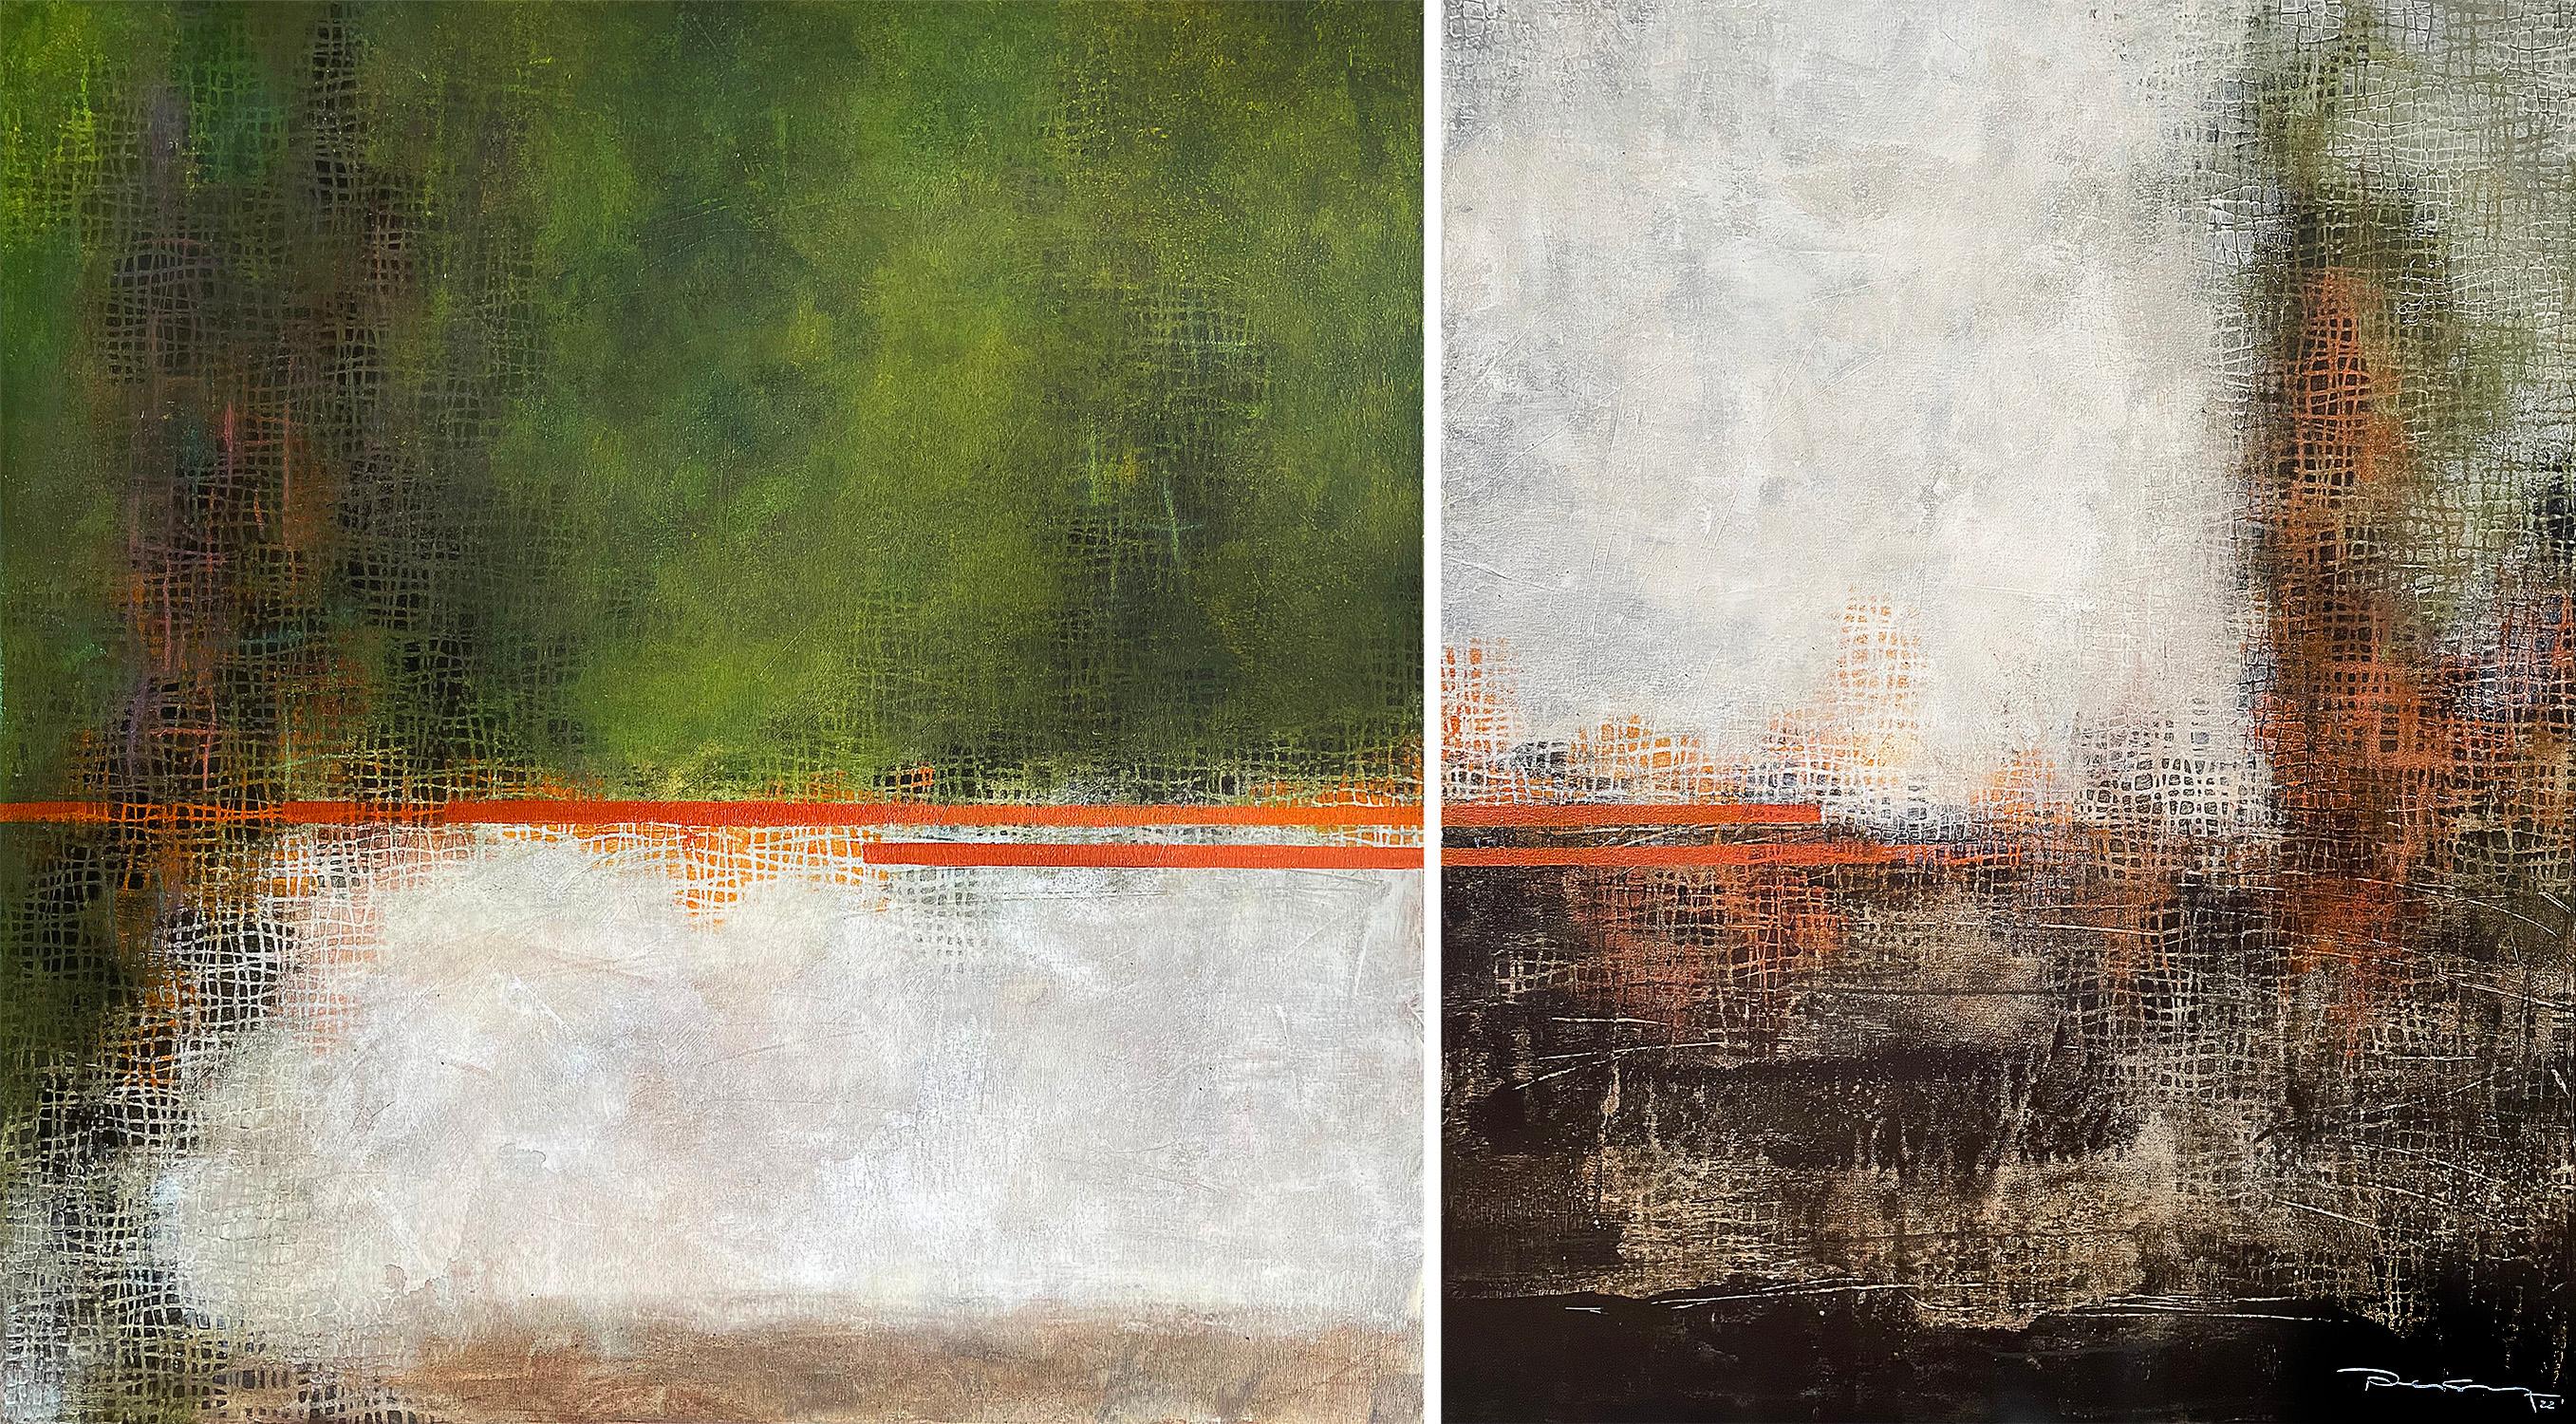 "Parallel Earth" by Peisy Ting is a stunning and thought-provoking abstract painting consisting of two separate pieces. The left piece measures 30 x 30 inches, while the right one is 30 x 24 inches, and both feature a gorgeous range of earthy tones